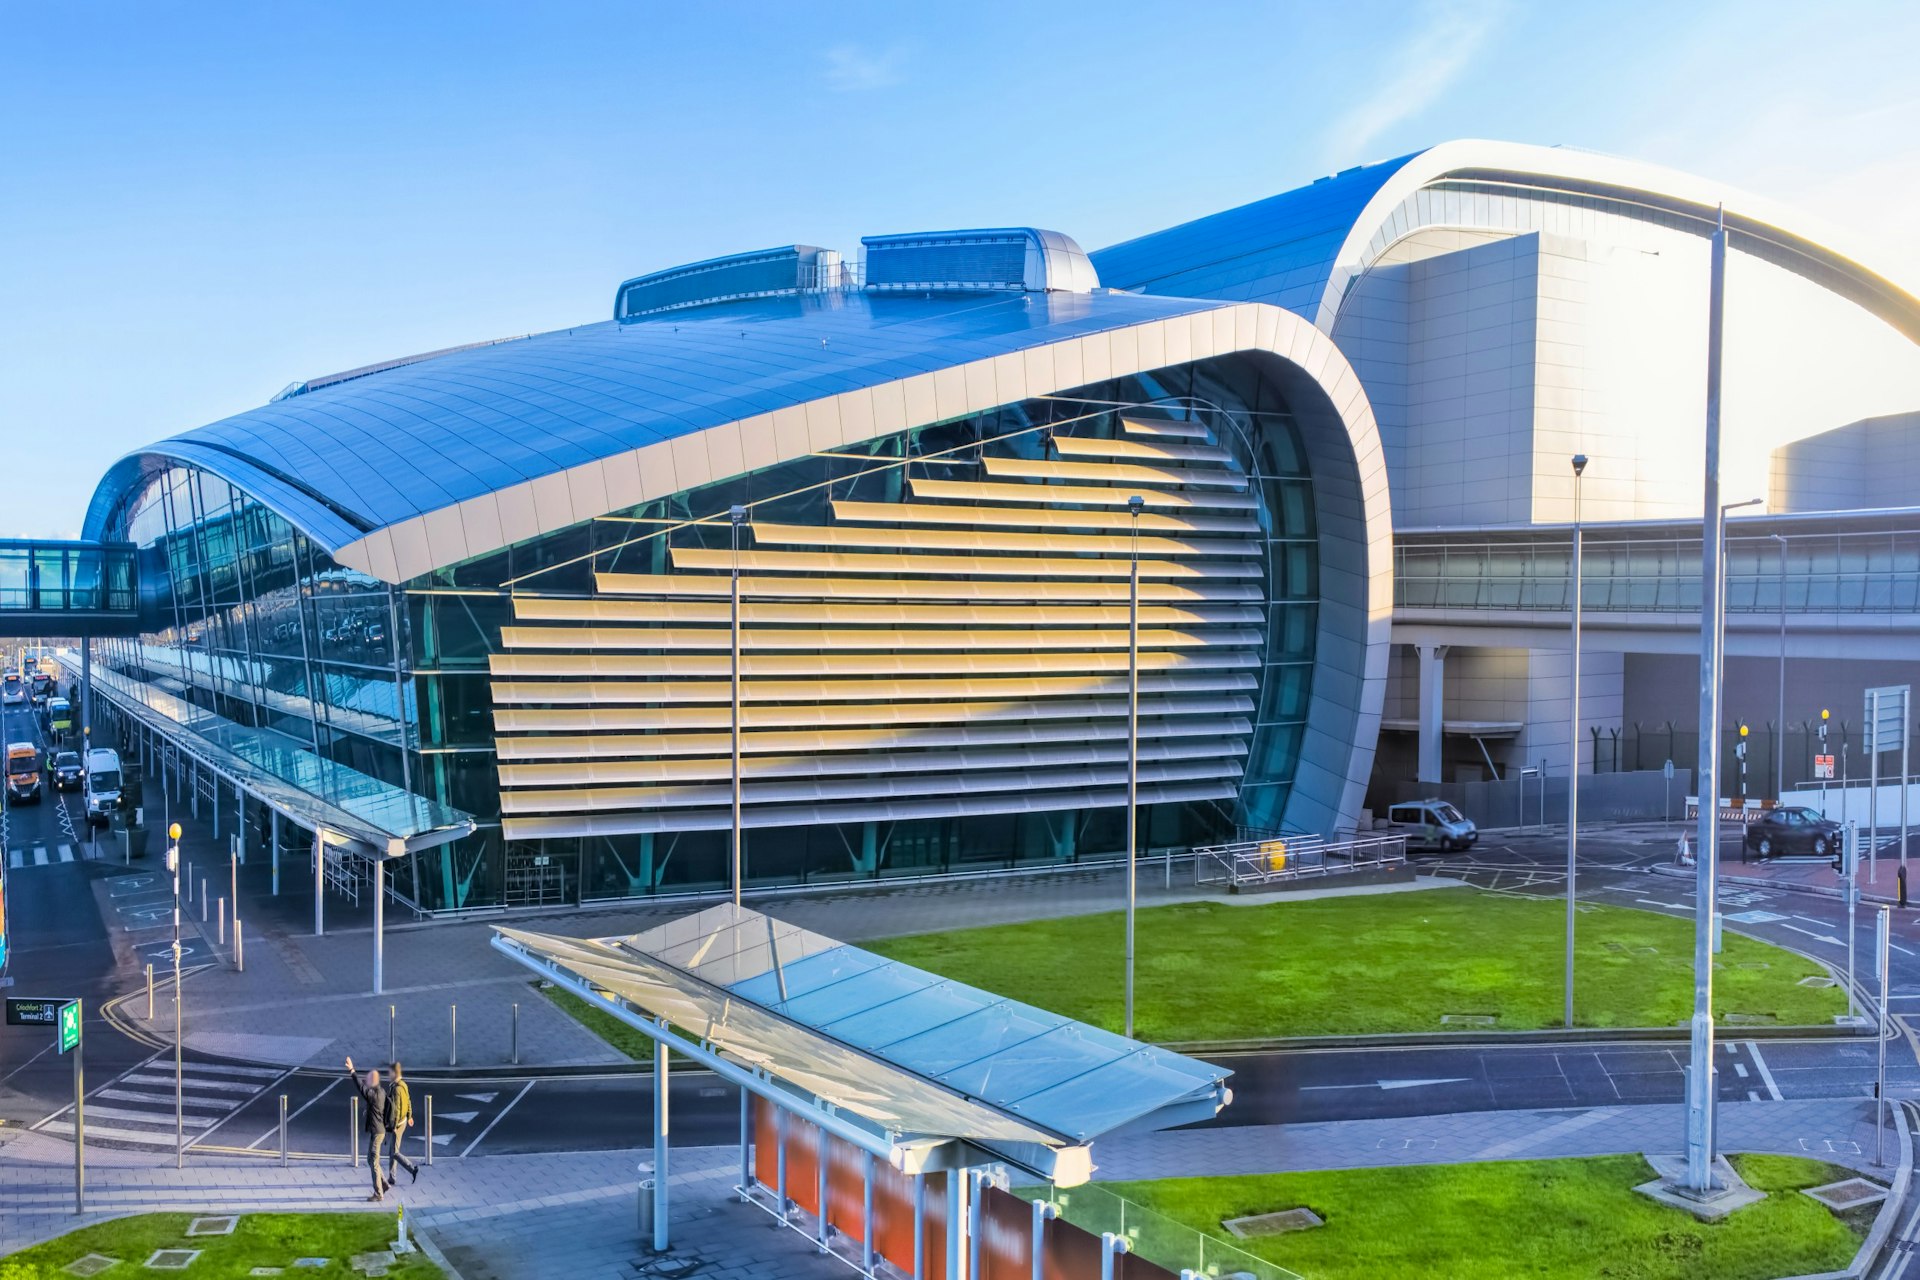 The exterior of Dublin Airport